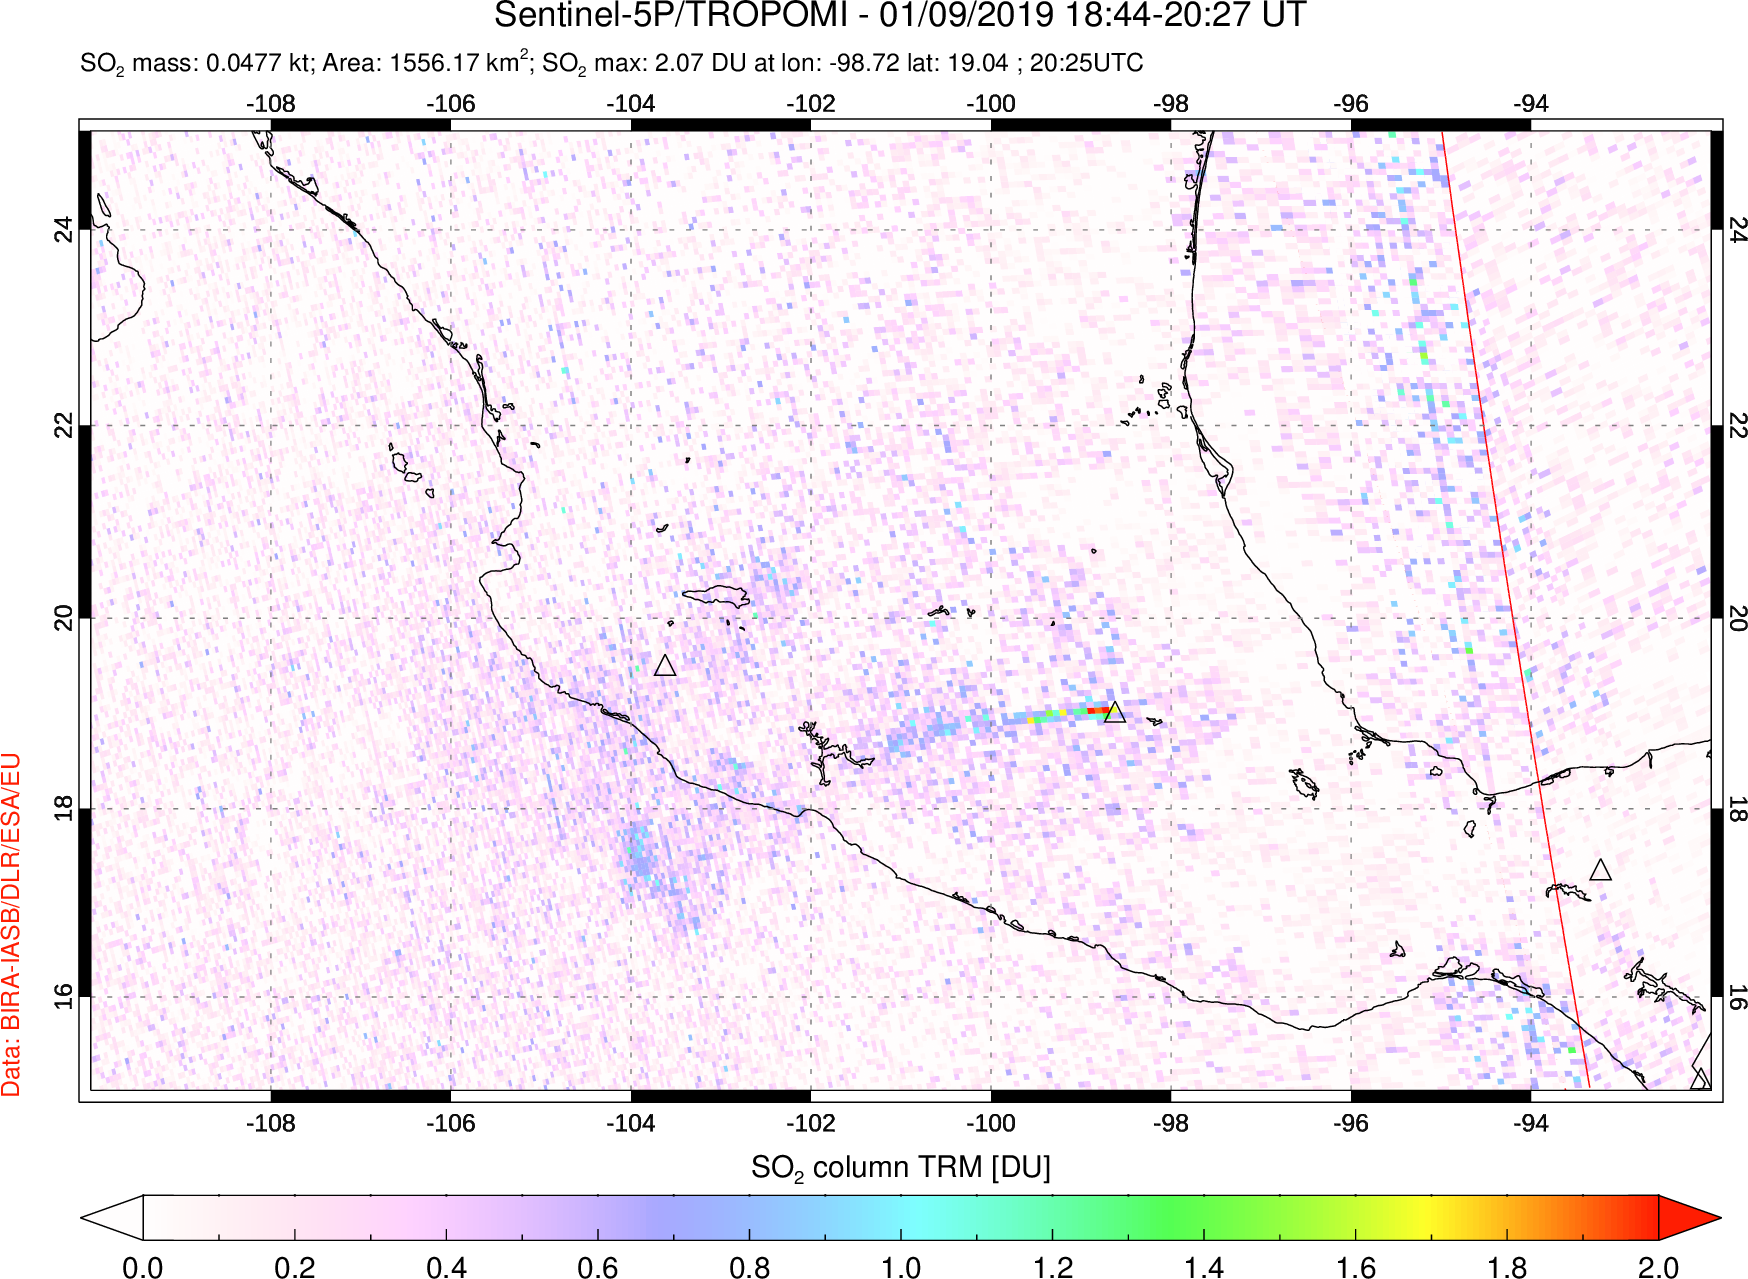 A sulfur dioxide image over Mexico on Jan 09, 2019.